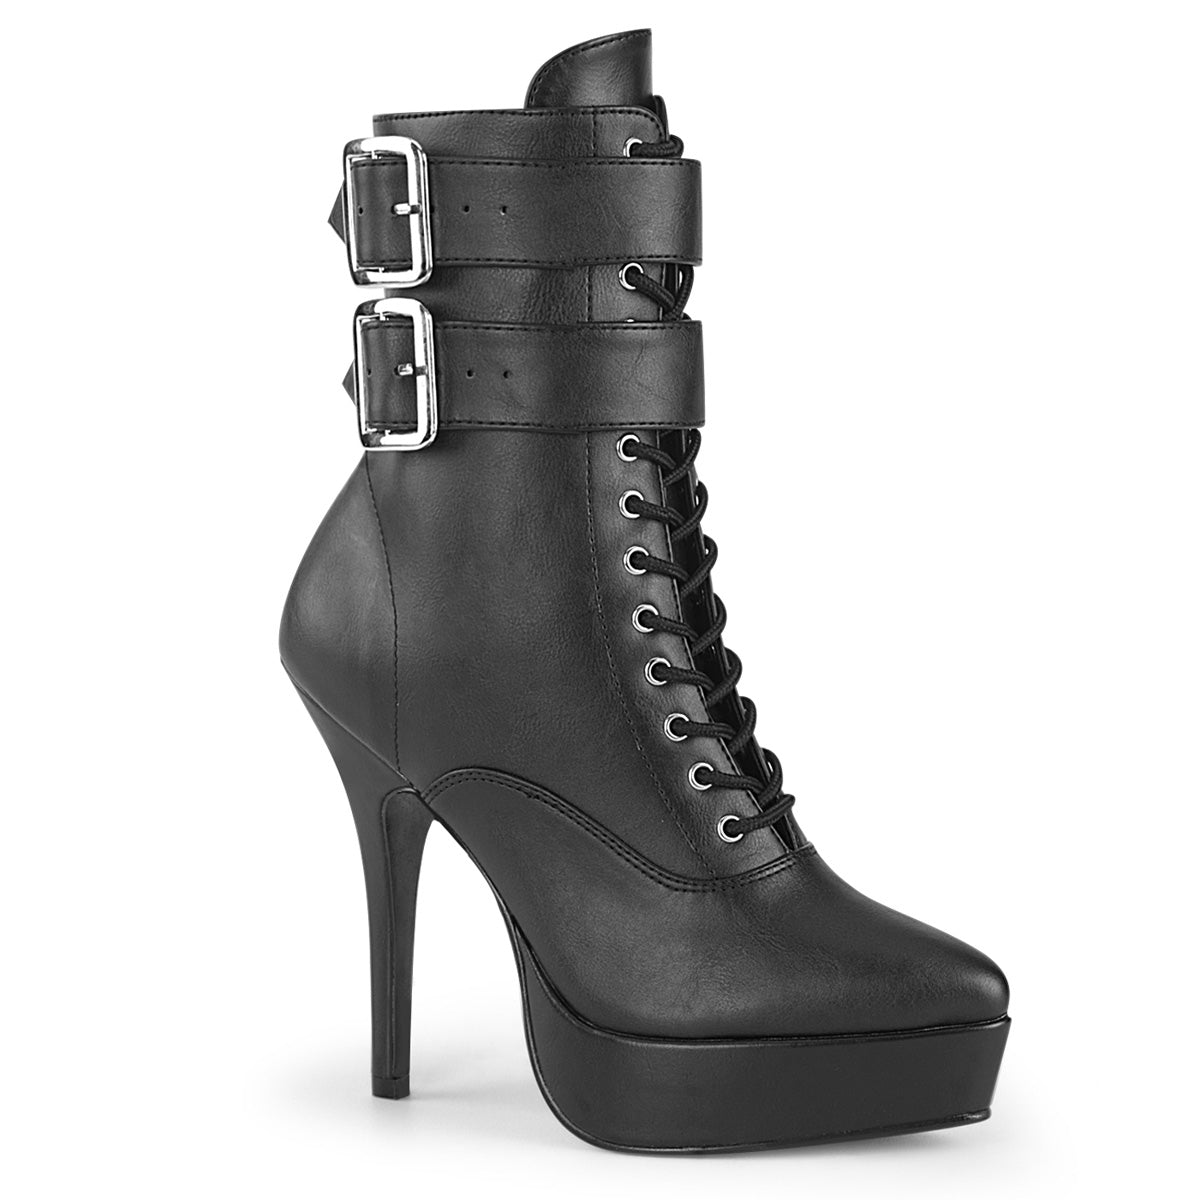 Buckle Lace-Up Ankle Boots with 5-inch Heel INDULGE-1026 – FantasiaWear